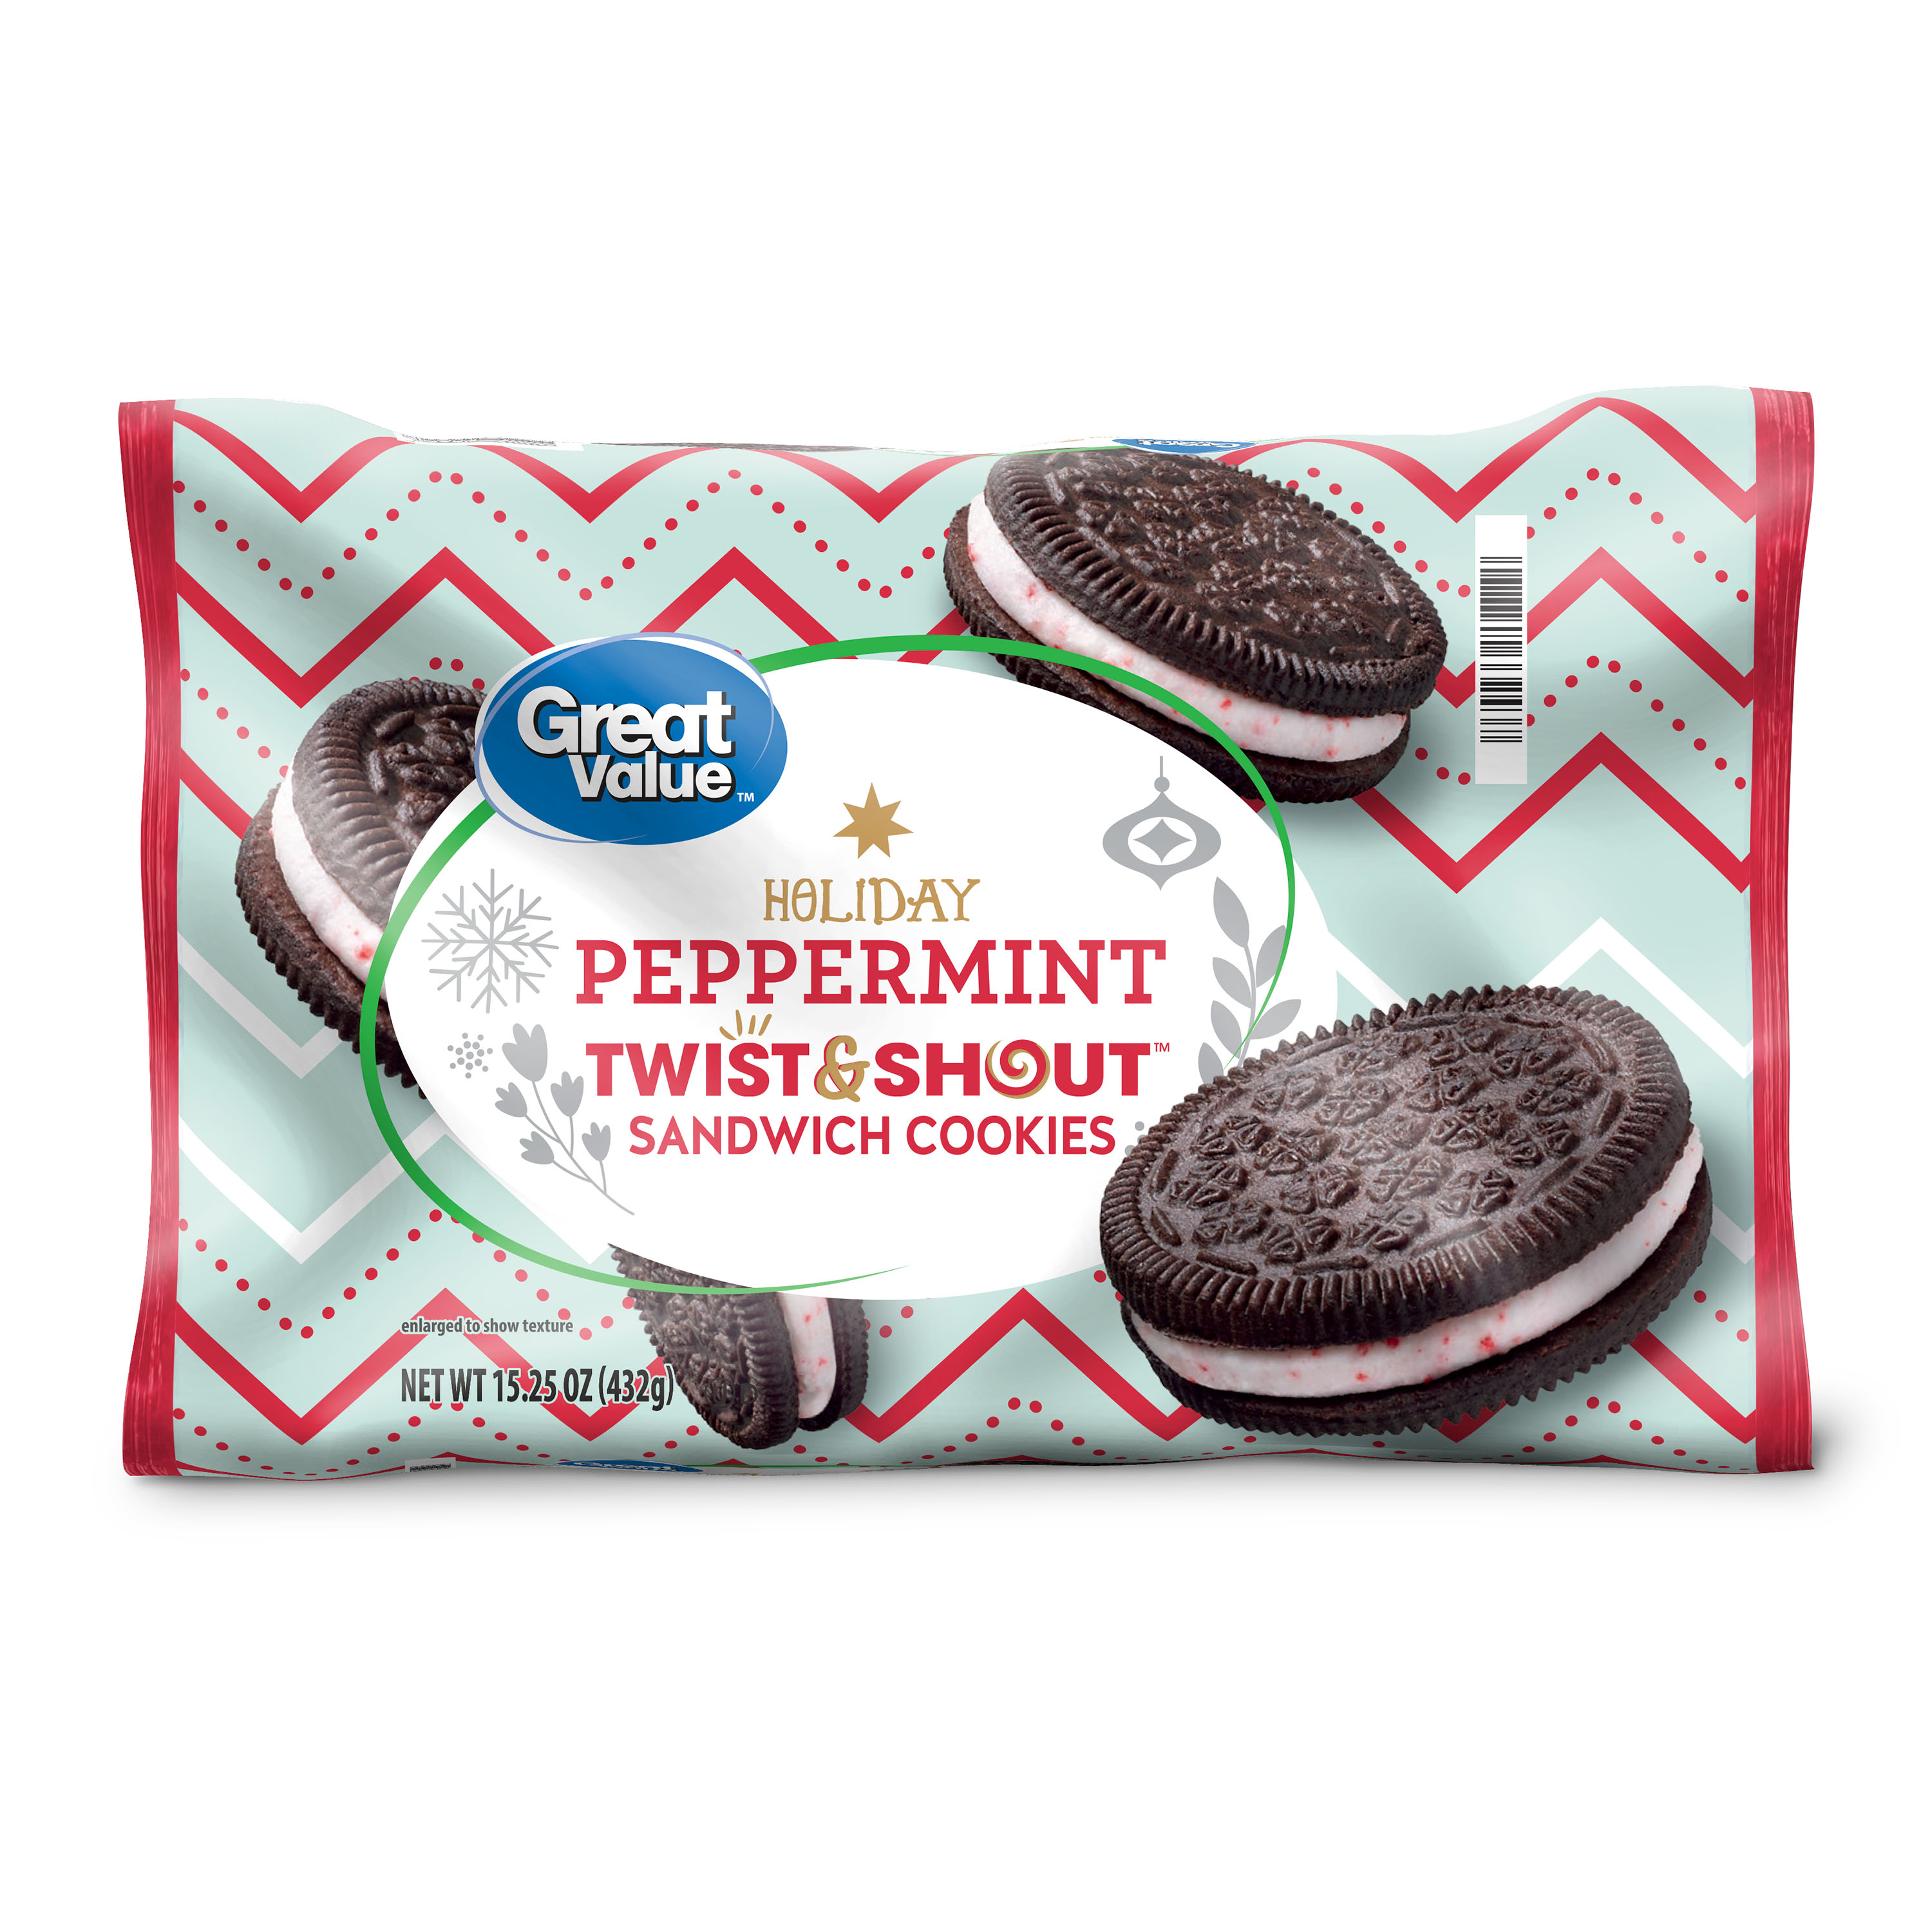 Great Value Holiday Peppermint Twist & Shout Sandwich Cookies 15.25 oz - image 1 of 6